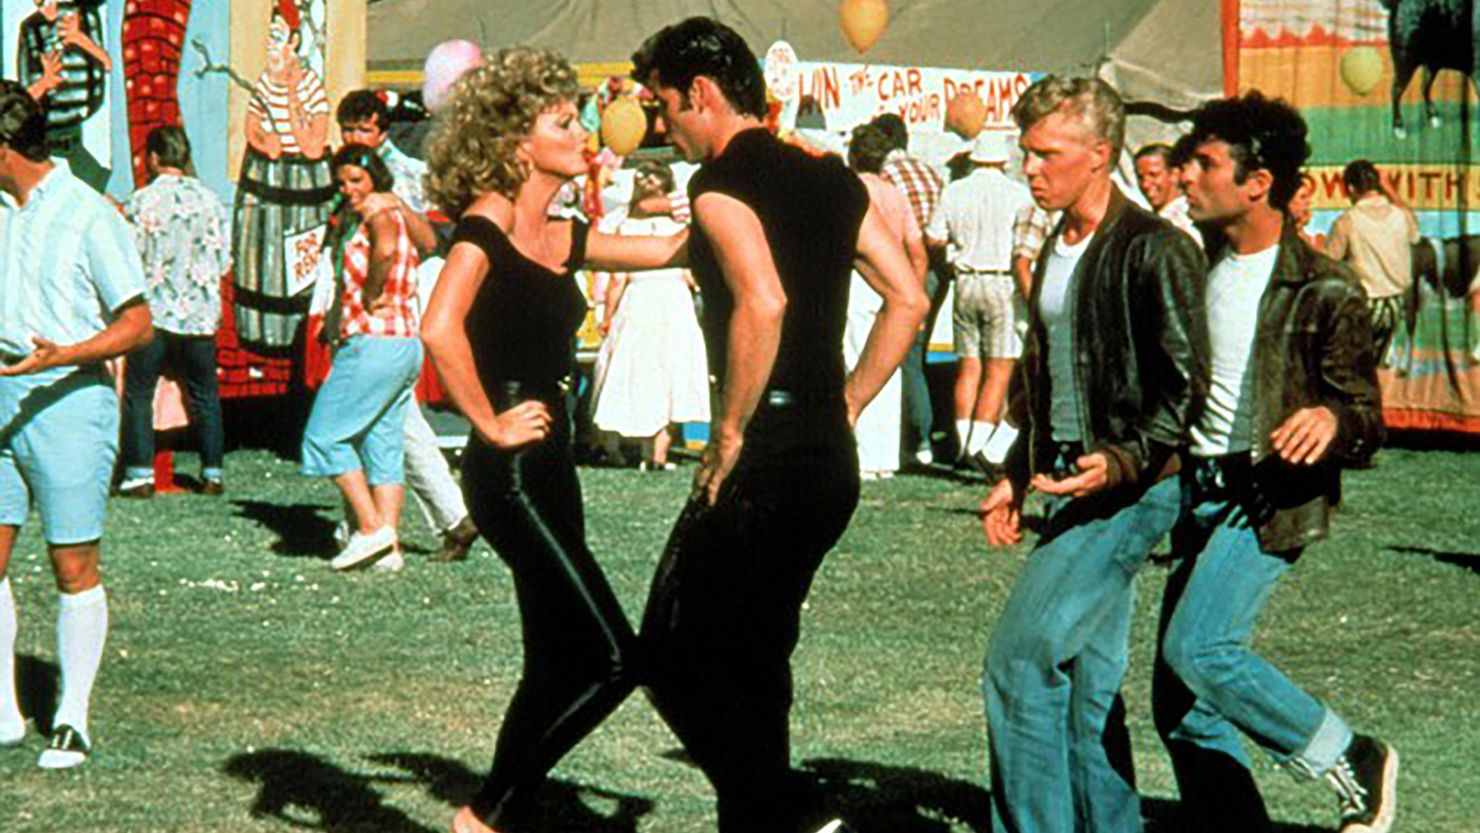 'Grease' premiered in 1978